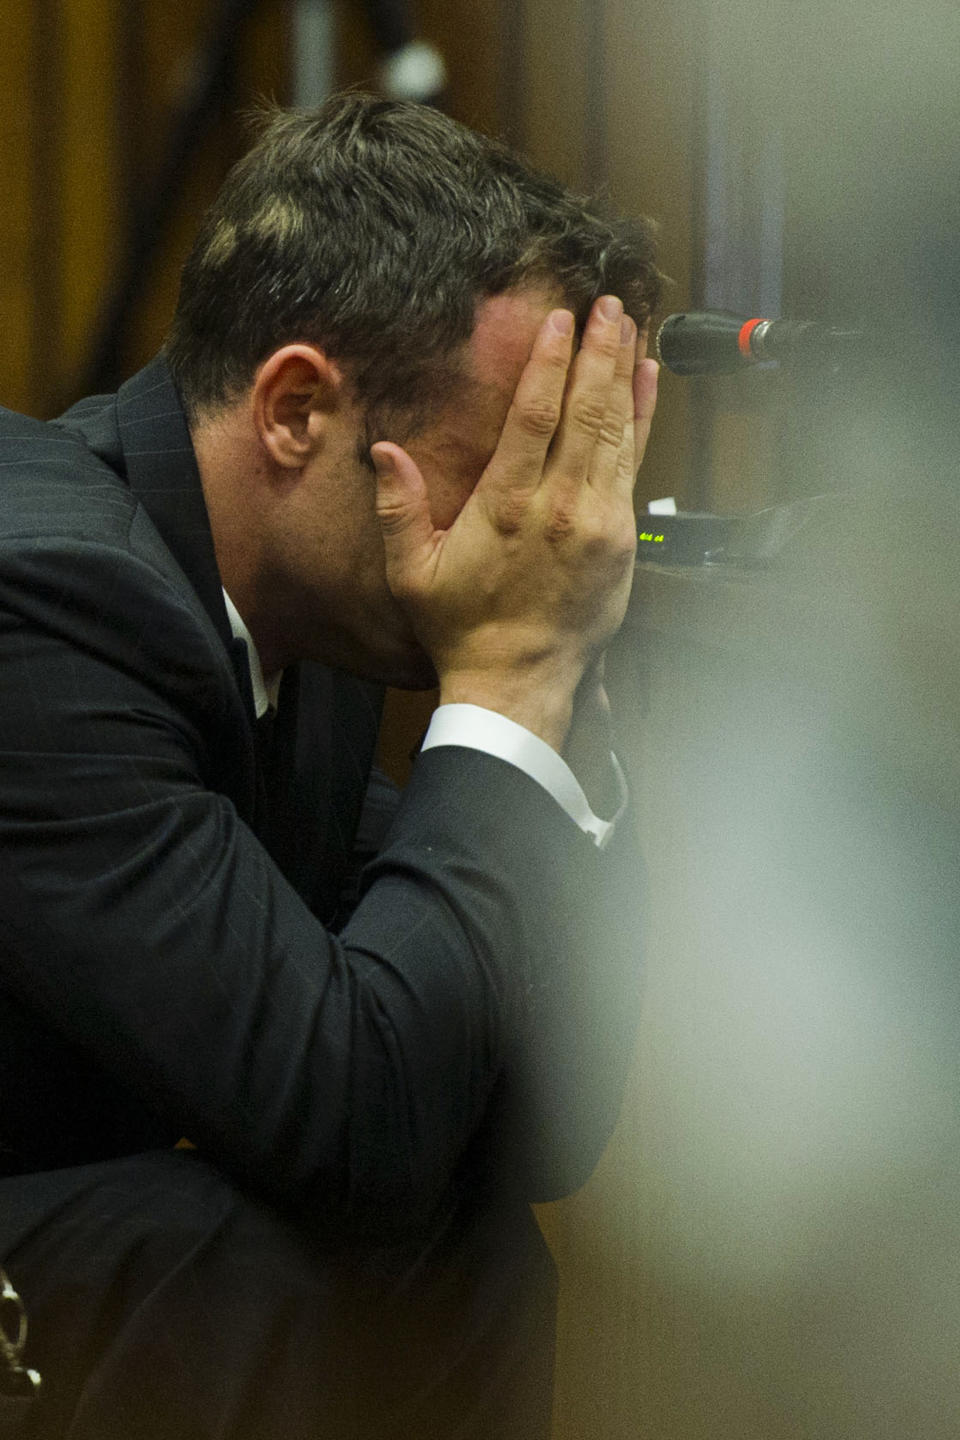 Oscar Pistorius covers his face with his hands as he listens to forensic evidence during his trial in court in Pretoria, South Africa, Thursday, March 13, 2014. Pistorius is charged with the shooting death of his girlfriend Reeva Steenkamp, on Valentines Day in 2013. (AP Photo/Alet Pretorius, Pool)